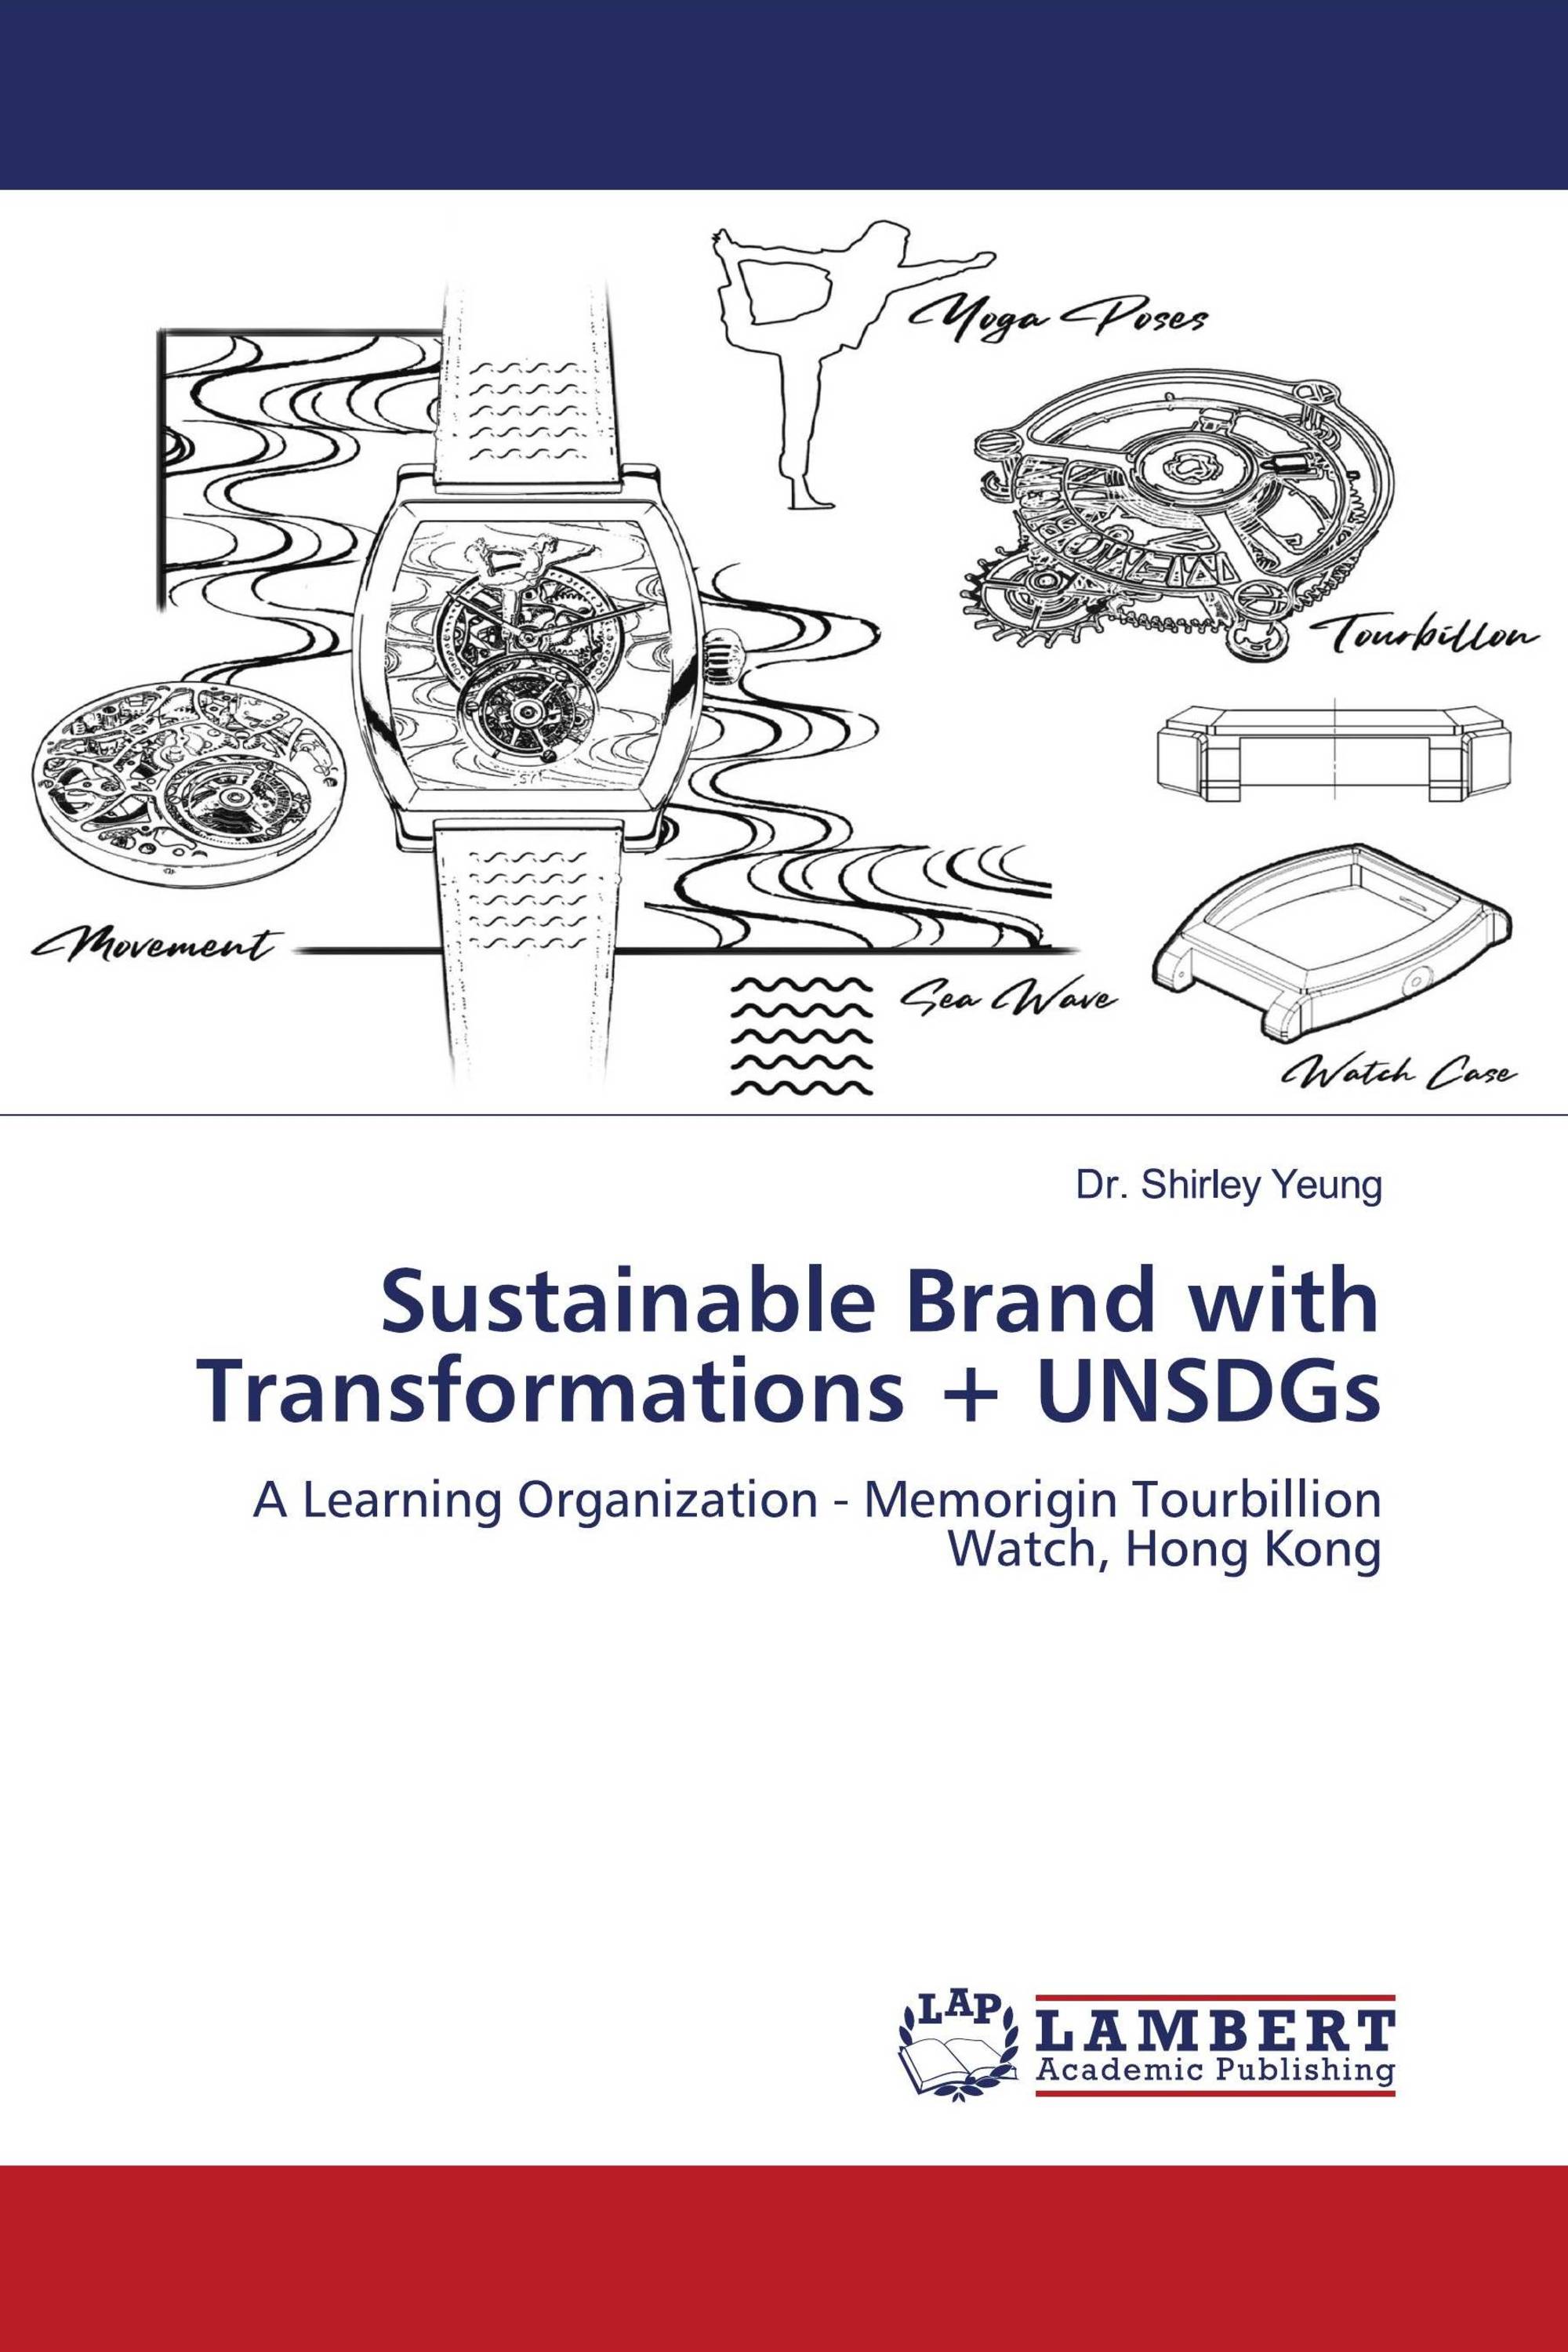 Sustainable Brand with Transformations + UNSDGs